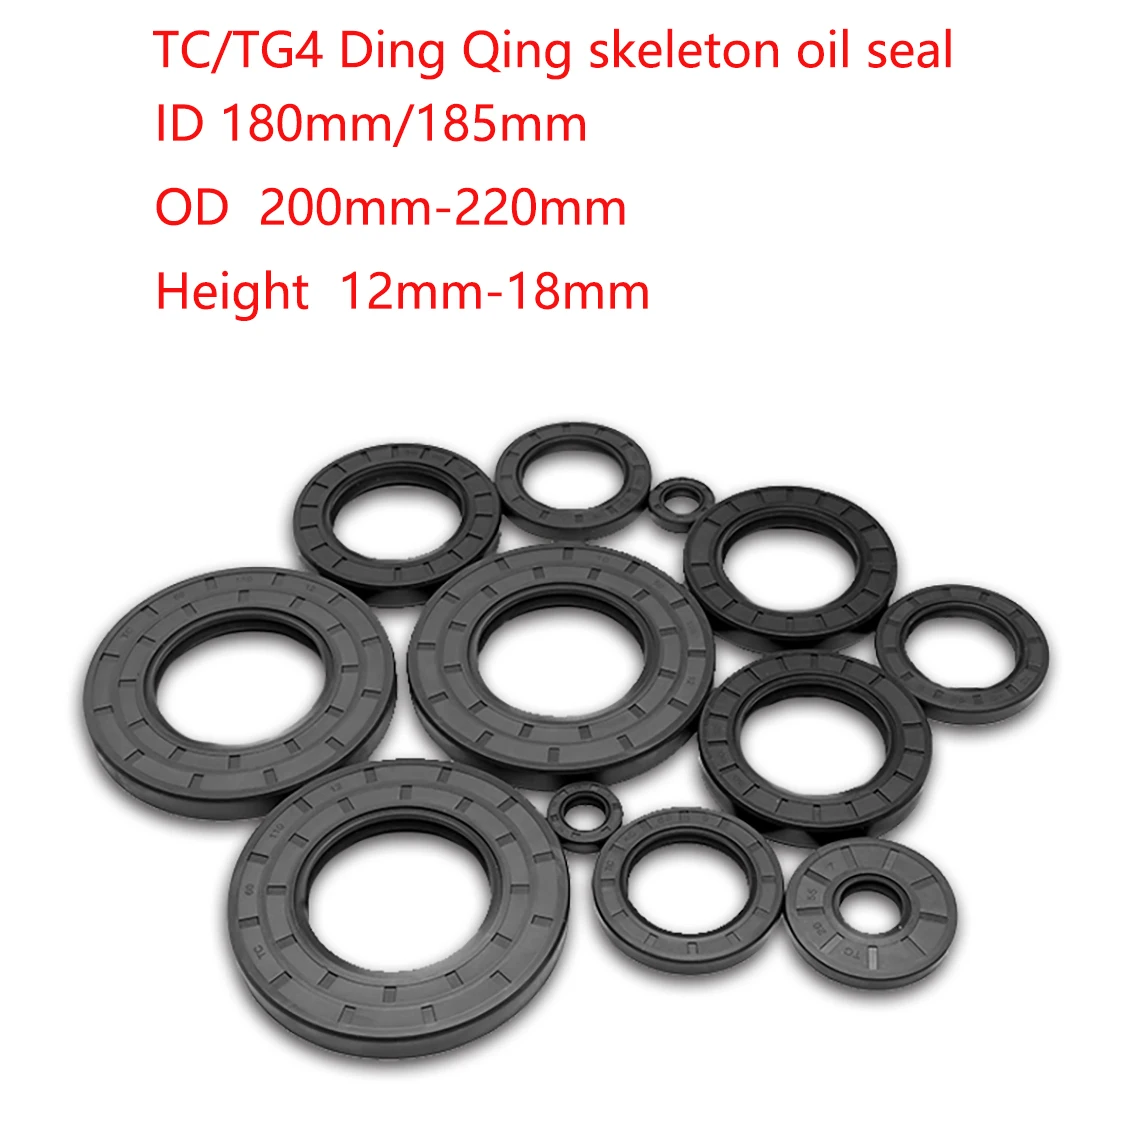 

ID: 180mm/185mm NBR TC/FB/TG4 Skeleton Oil Seal Rings Double Lip Seal For Rotation Shaft OD: 200mm - 220mm Height: 12mm - 18mm